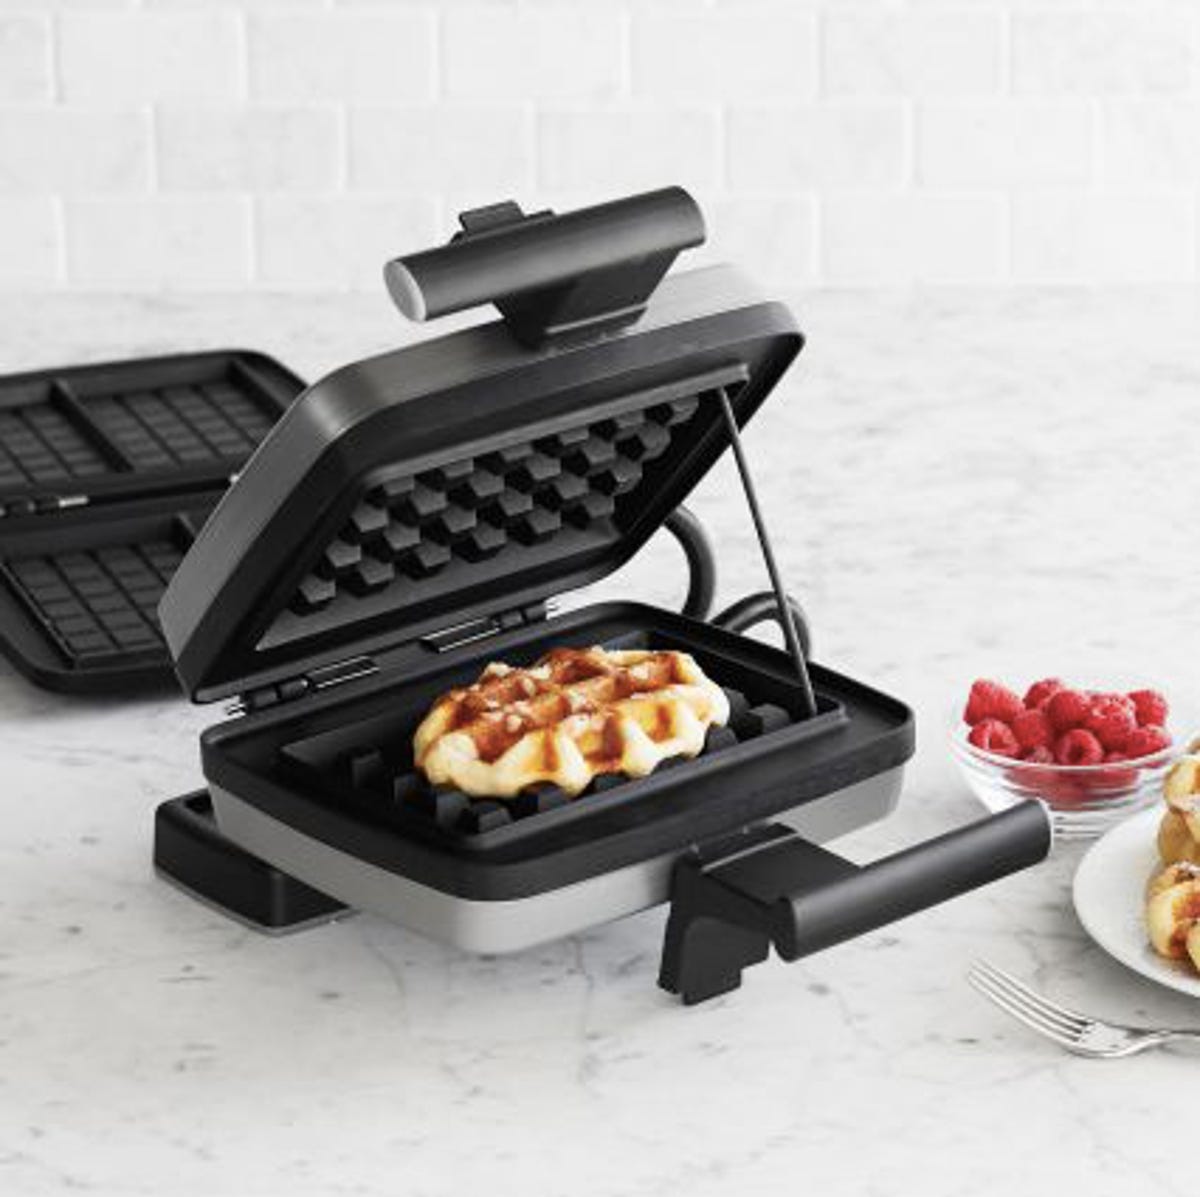 Whatever you favorite waffle happens to be the Croquade Twins Waffle Maker can take you there.